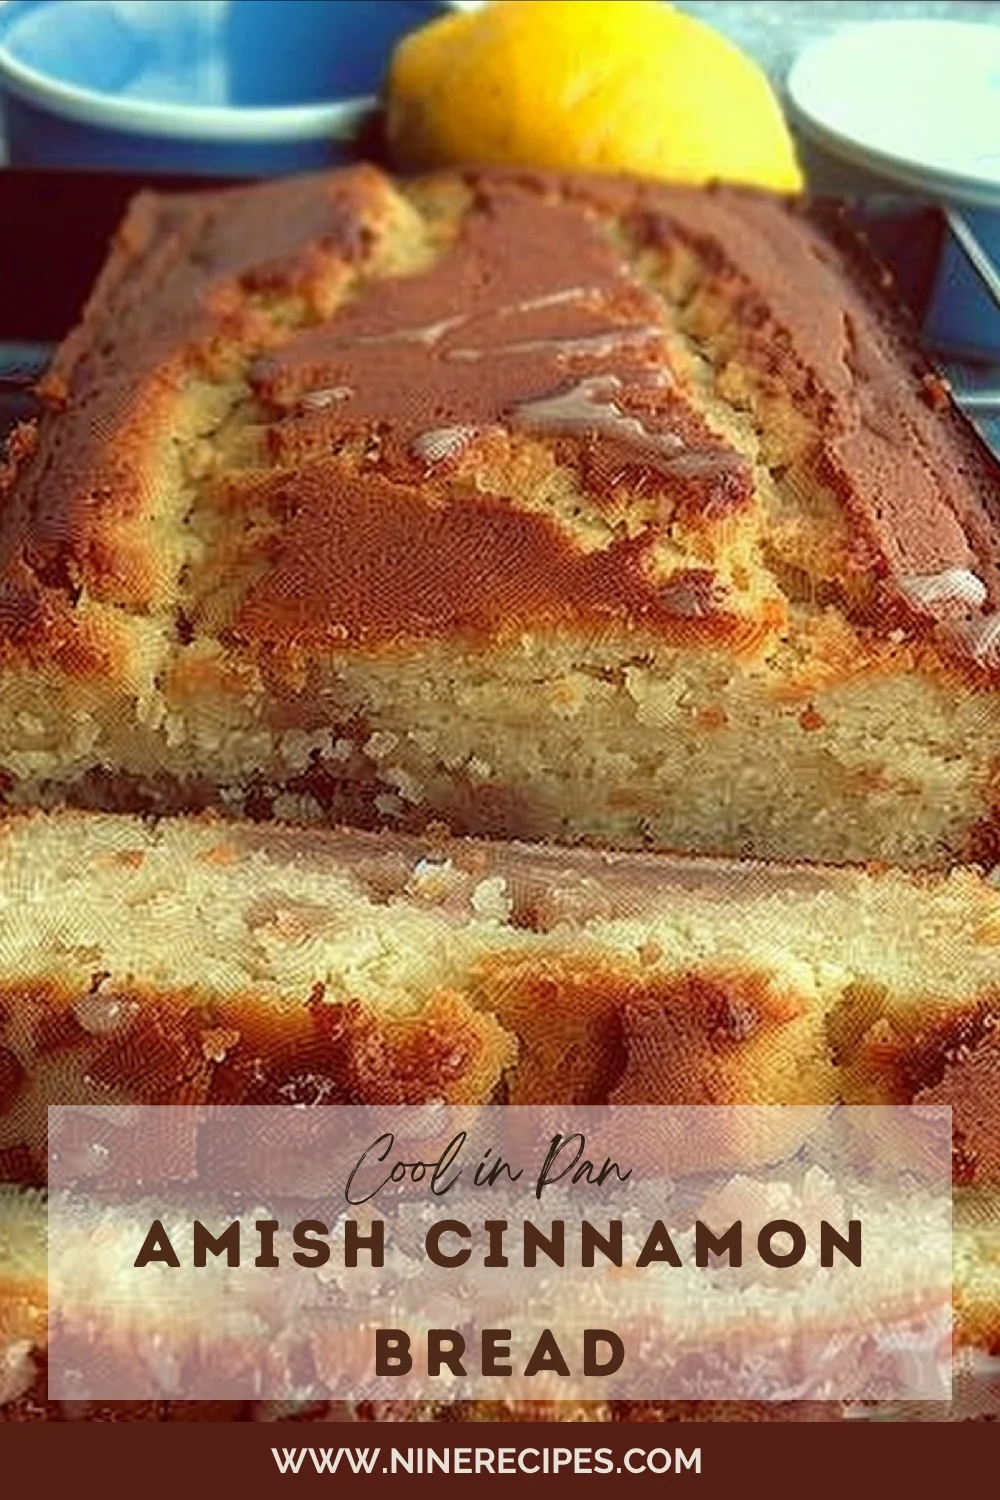 Bake the perfect loaf of Amish Cinnamon Bread with our easy-to-follow recipe. Ideal for a cozy family breakfast or a sweet snack!